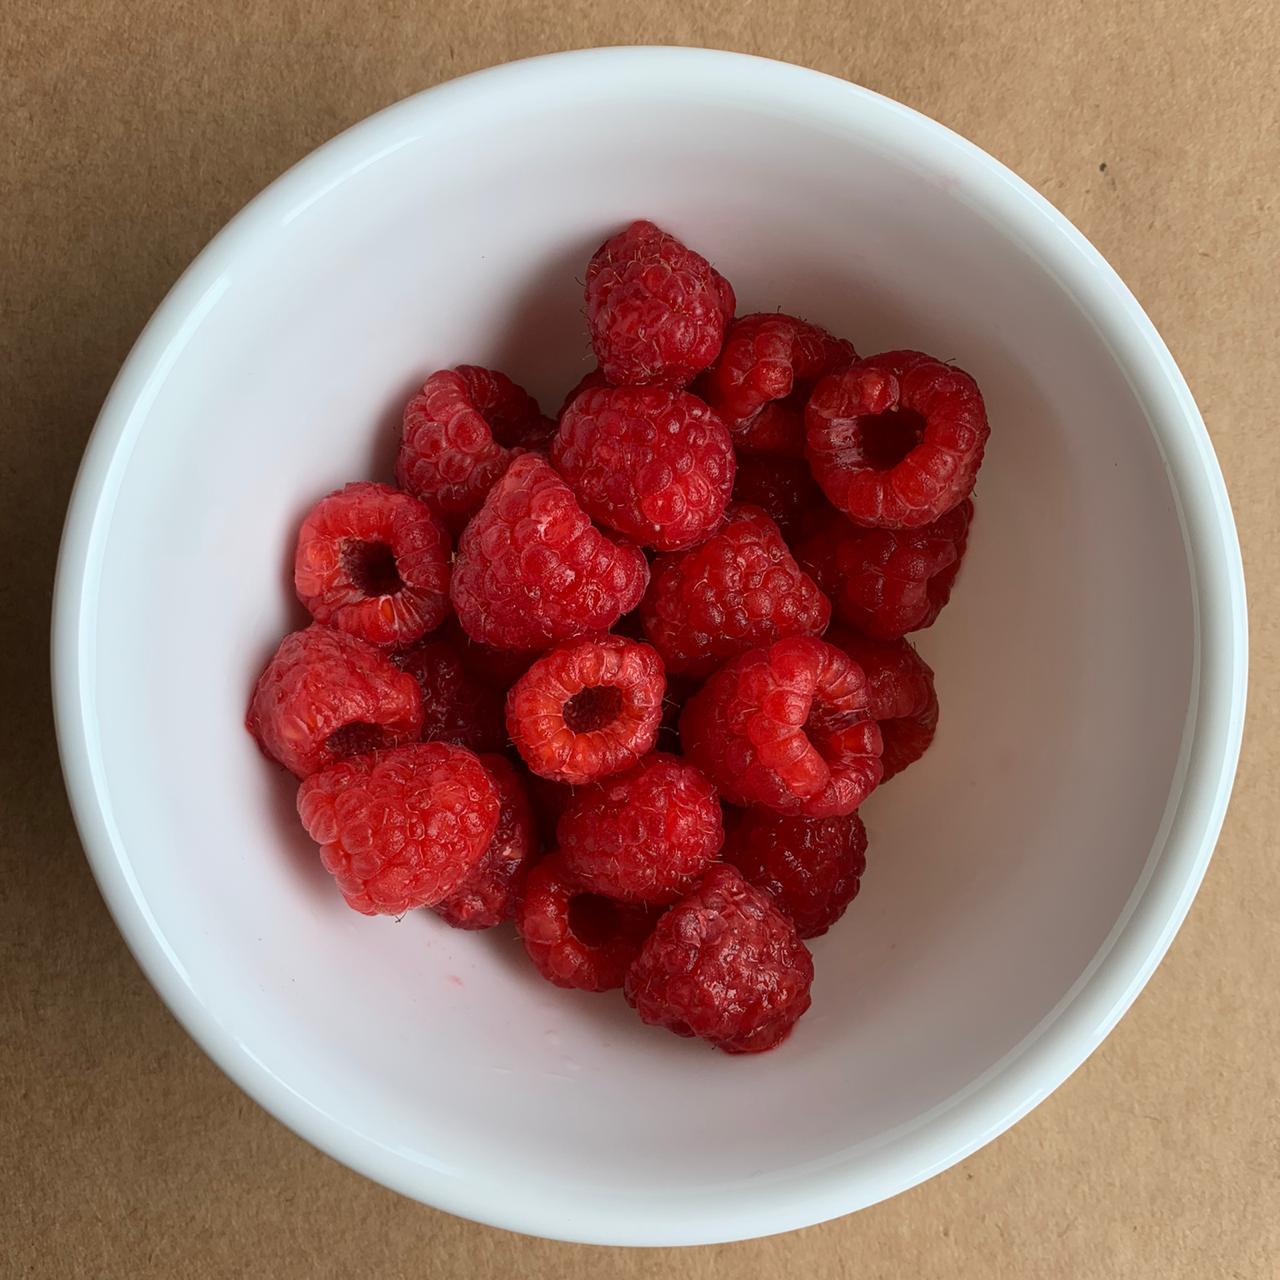 Raspberries 125 gms (Imported) (Available only on Wednesdays and Fridays)